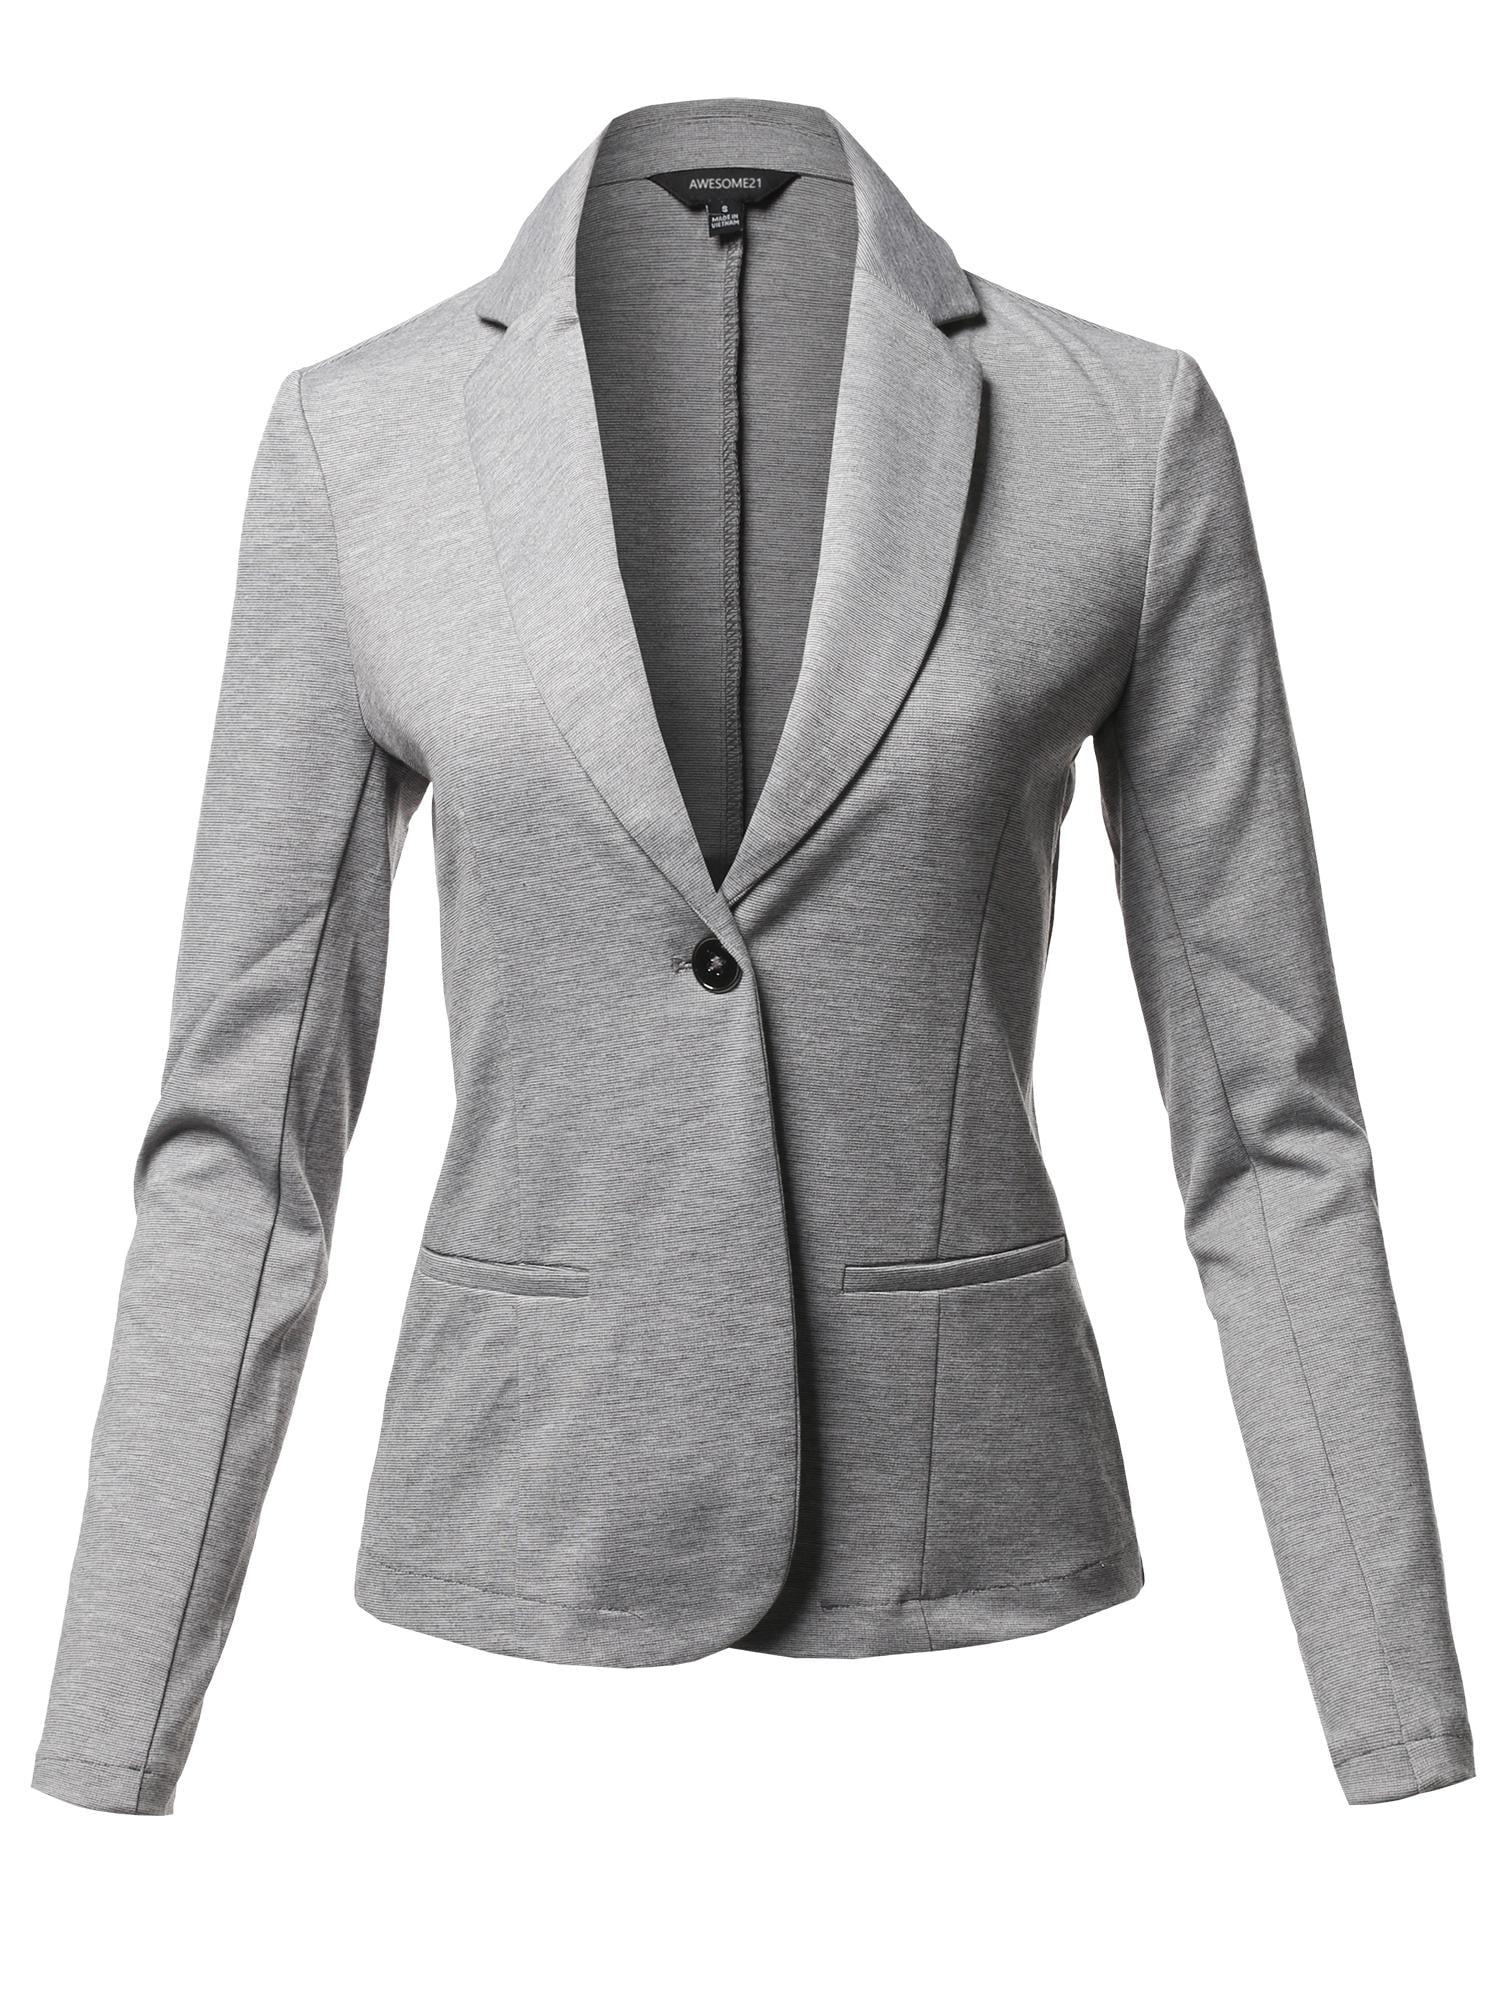 FashionOutfit Women's Solid Formal Single Button Up Long Sleeve Blazer ...